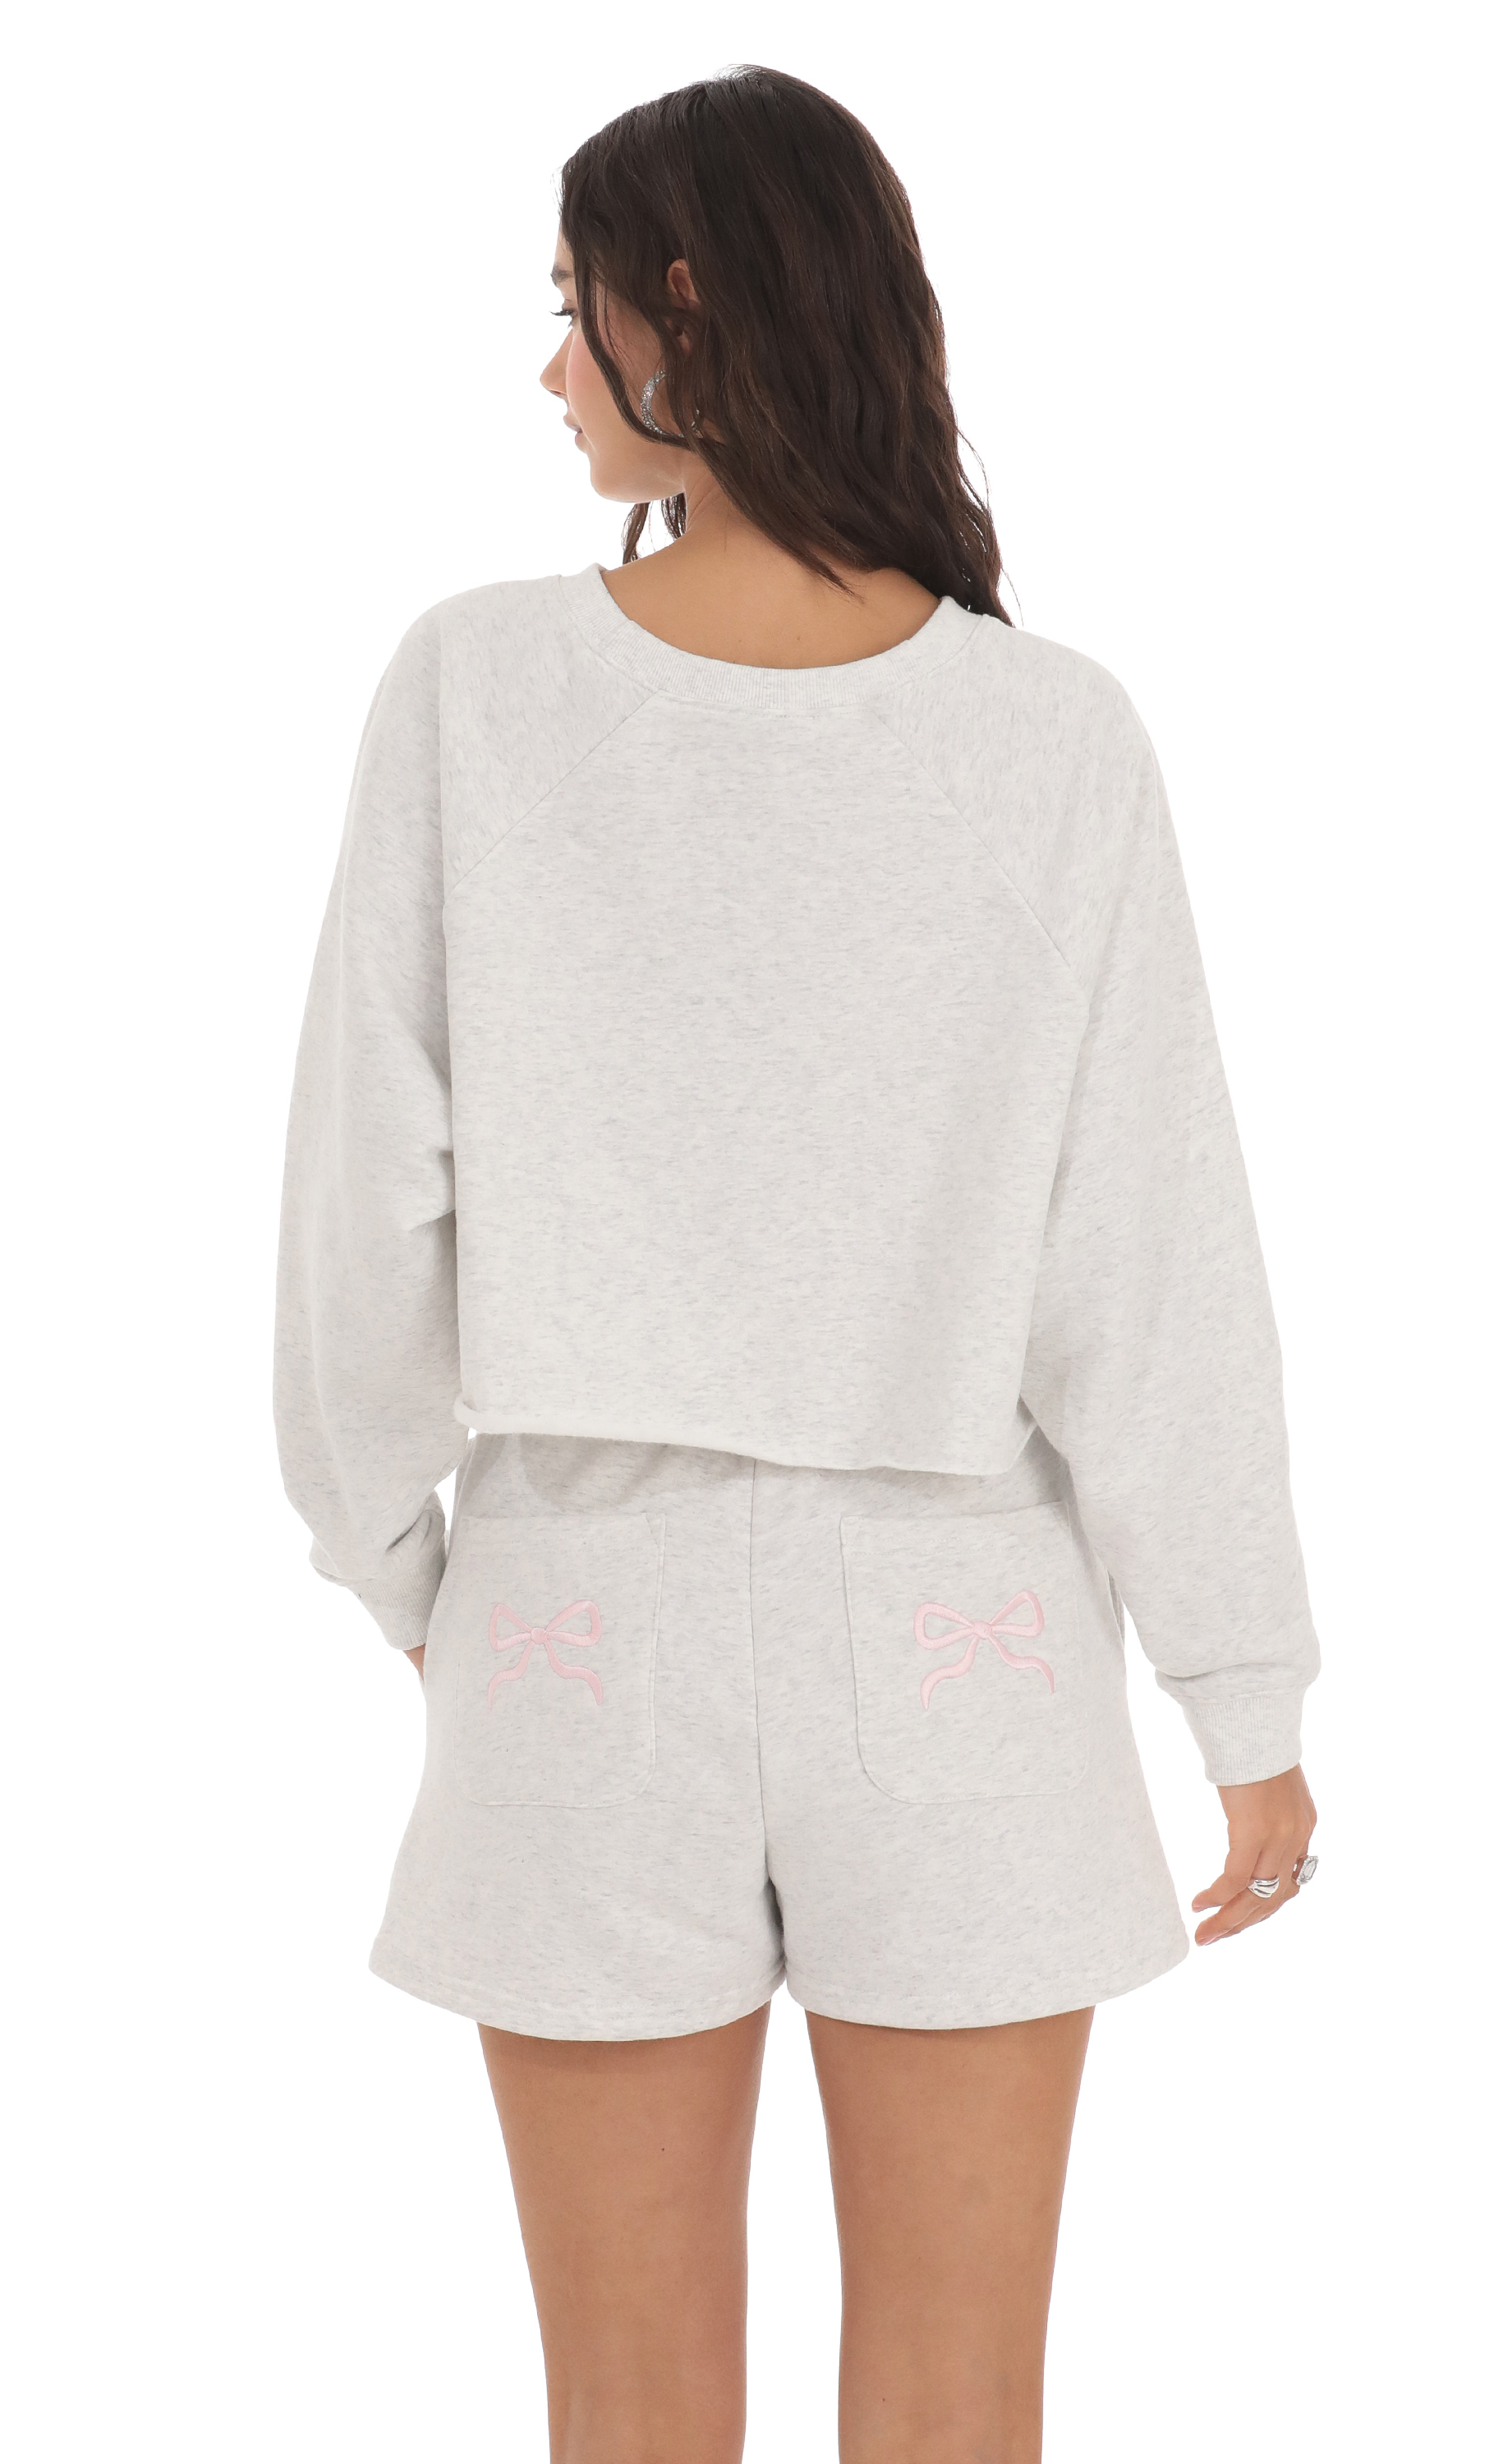 Bows Back Pocket Bows Sweat Shorts in Heather Grey